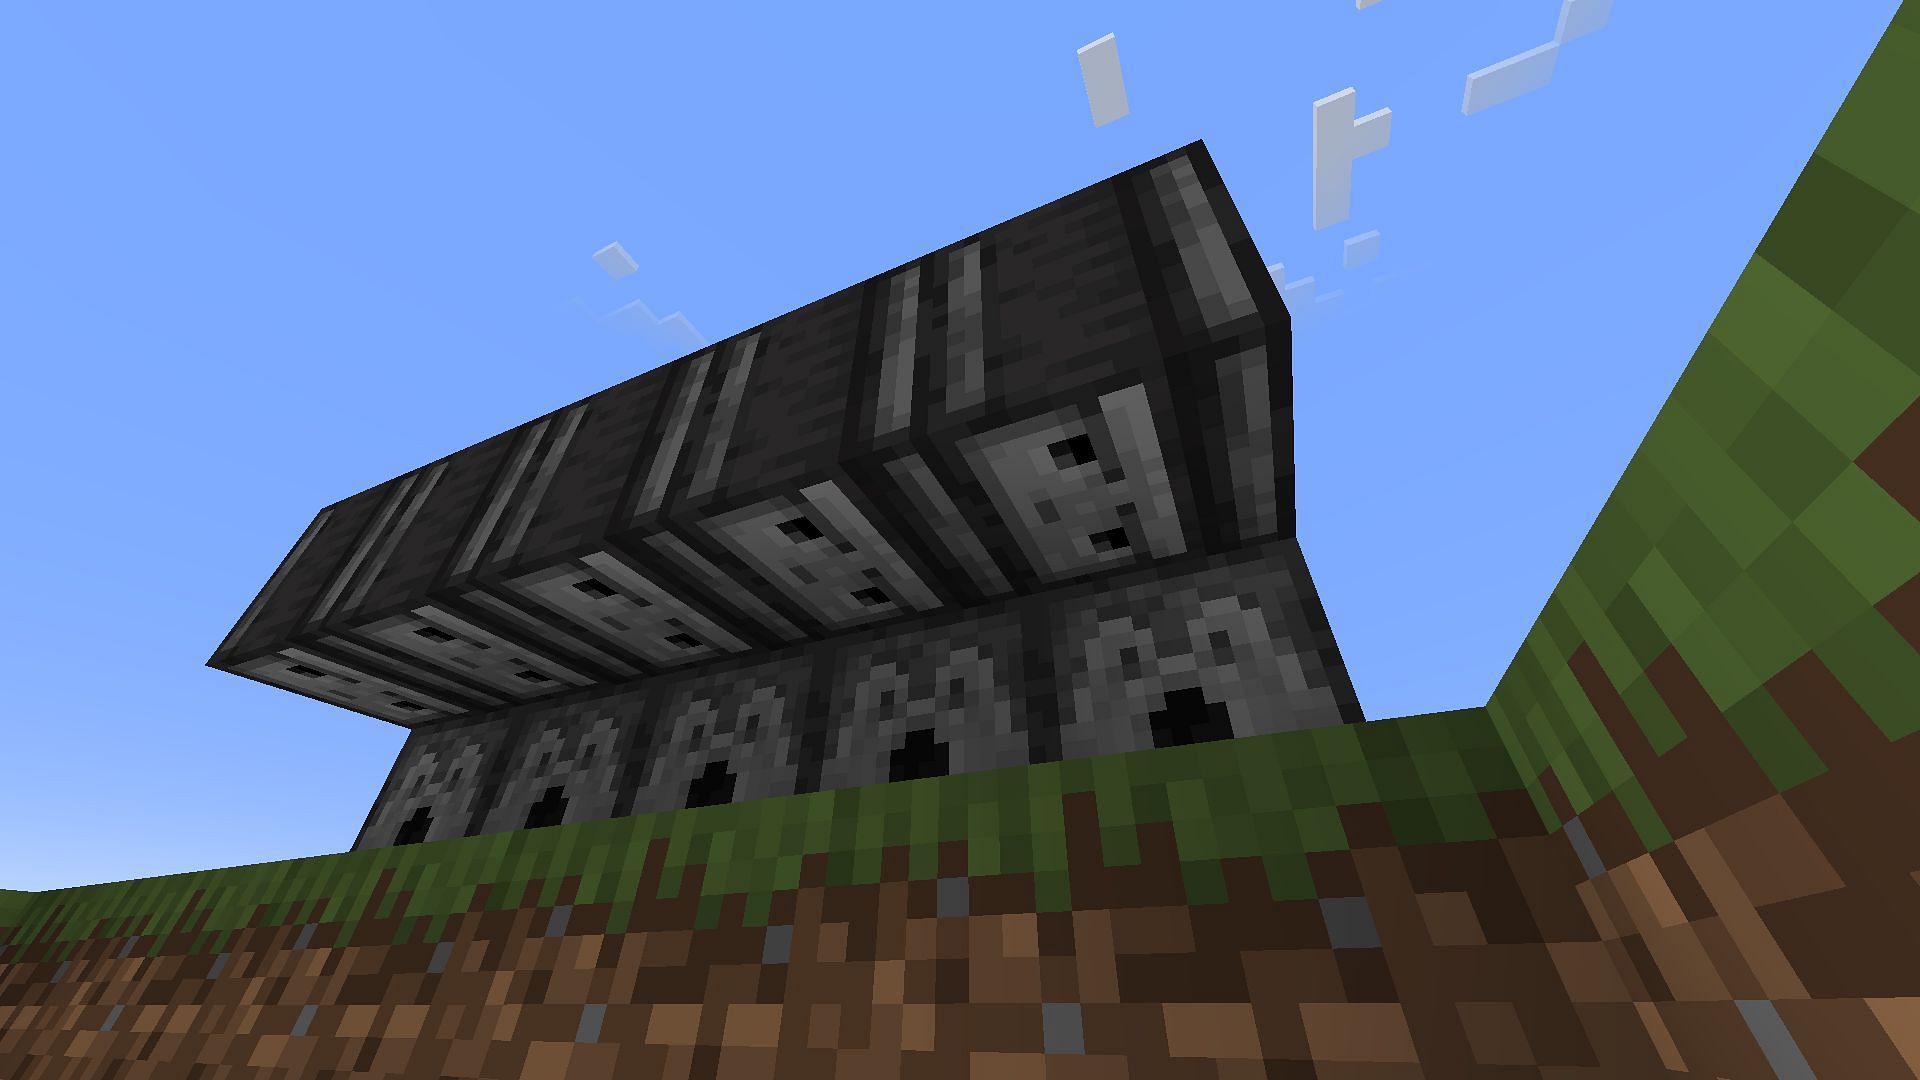 Dispensers and observers detect changes in bee nests and hives in Minecraft (Image via Mojang)